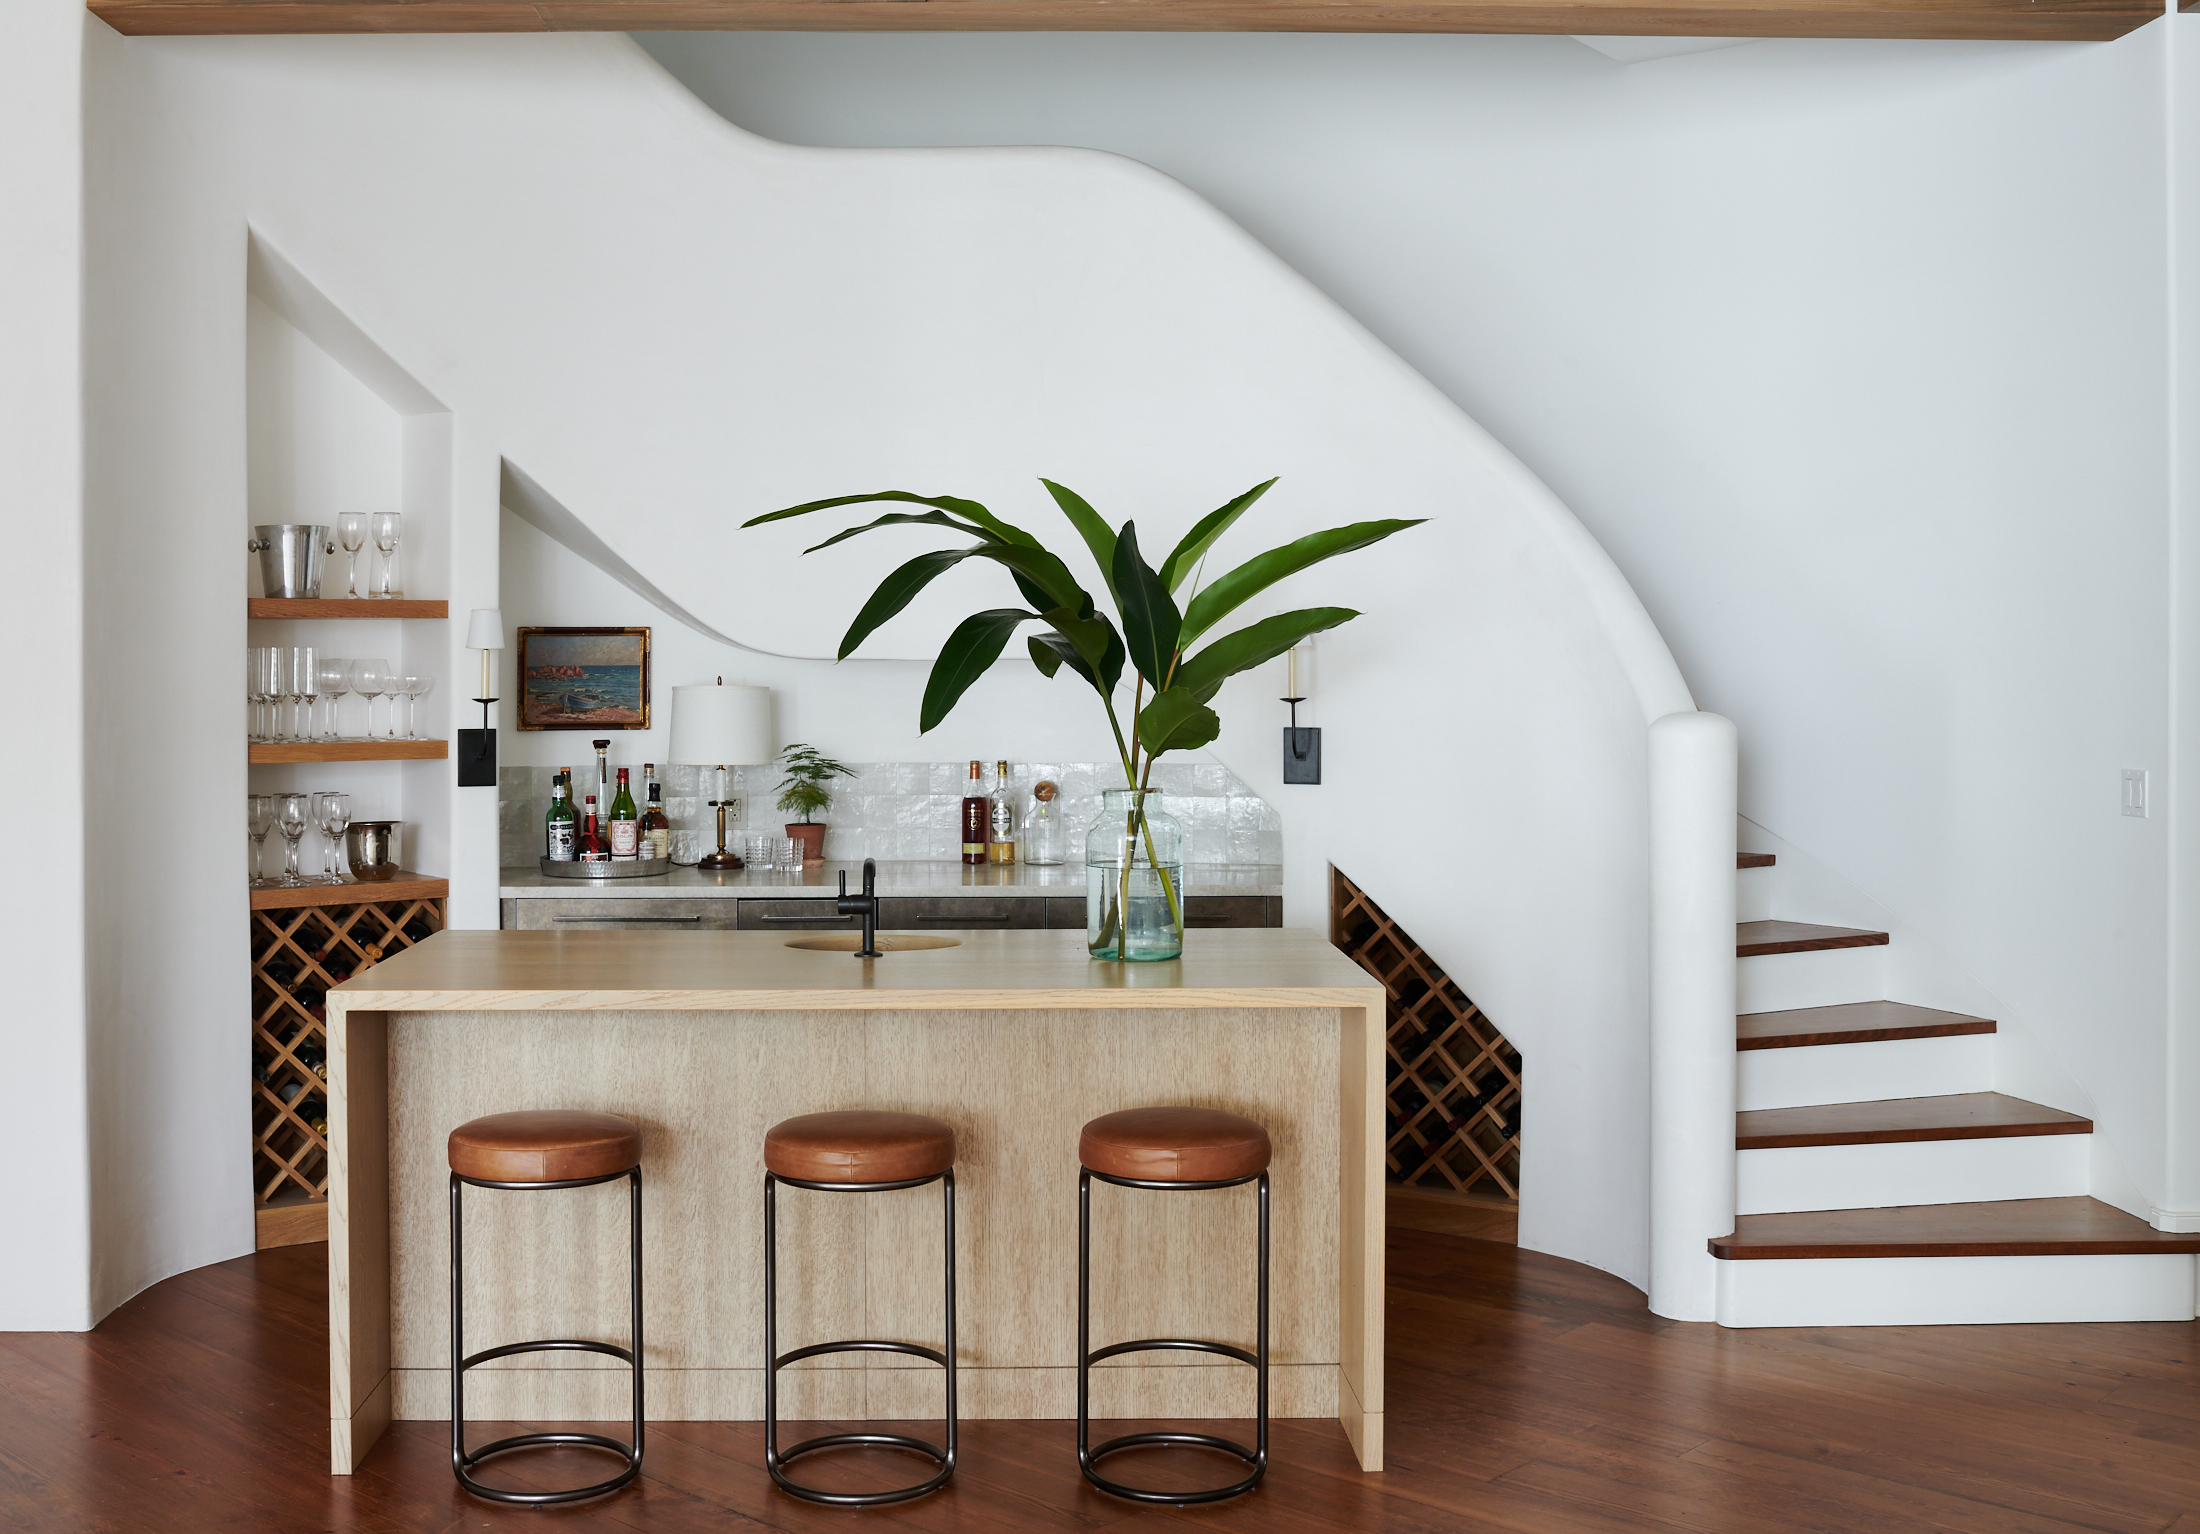  Home bar with staircase by Alison Gootee Photography for Logan Killen Interiors 